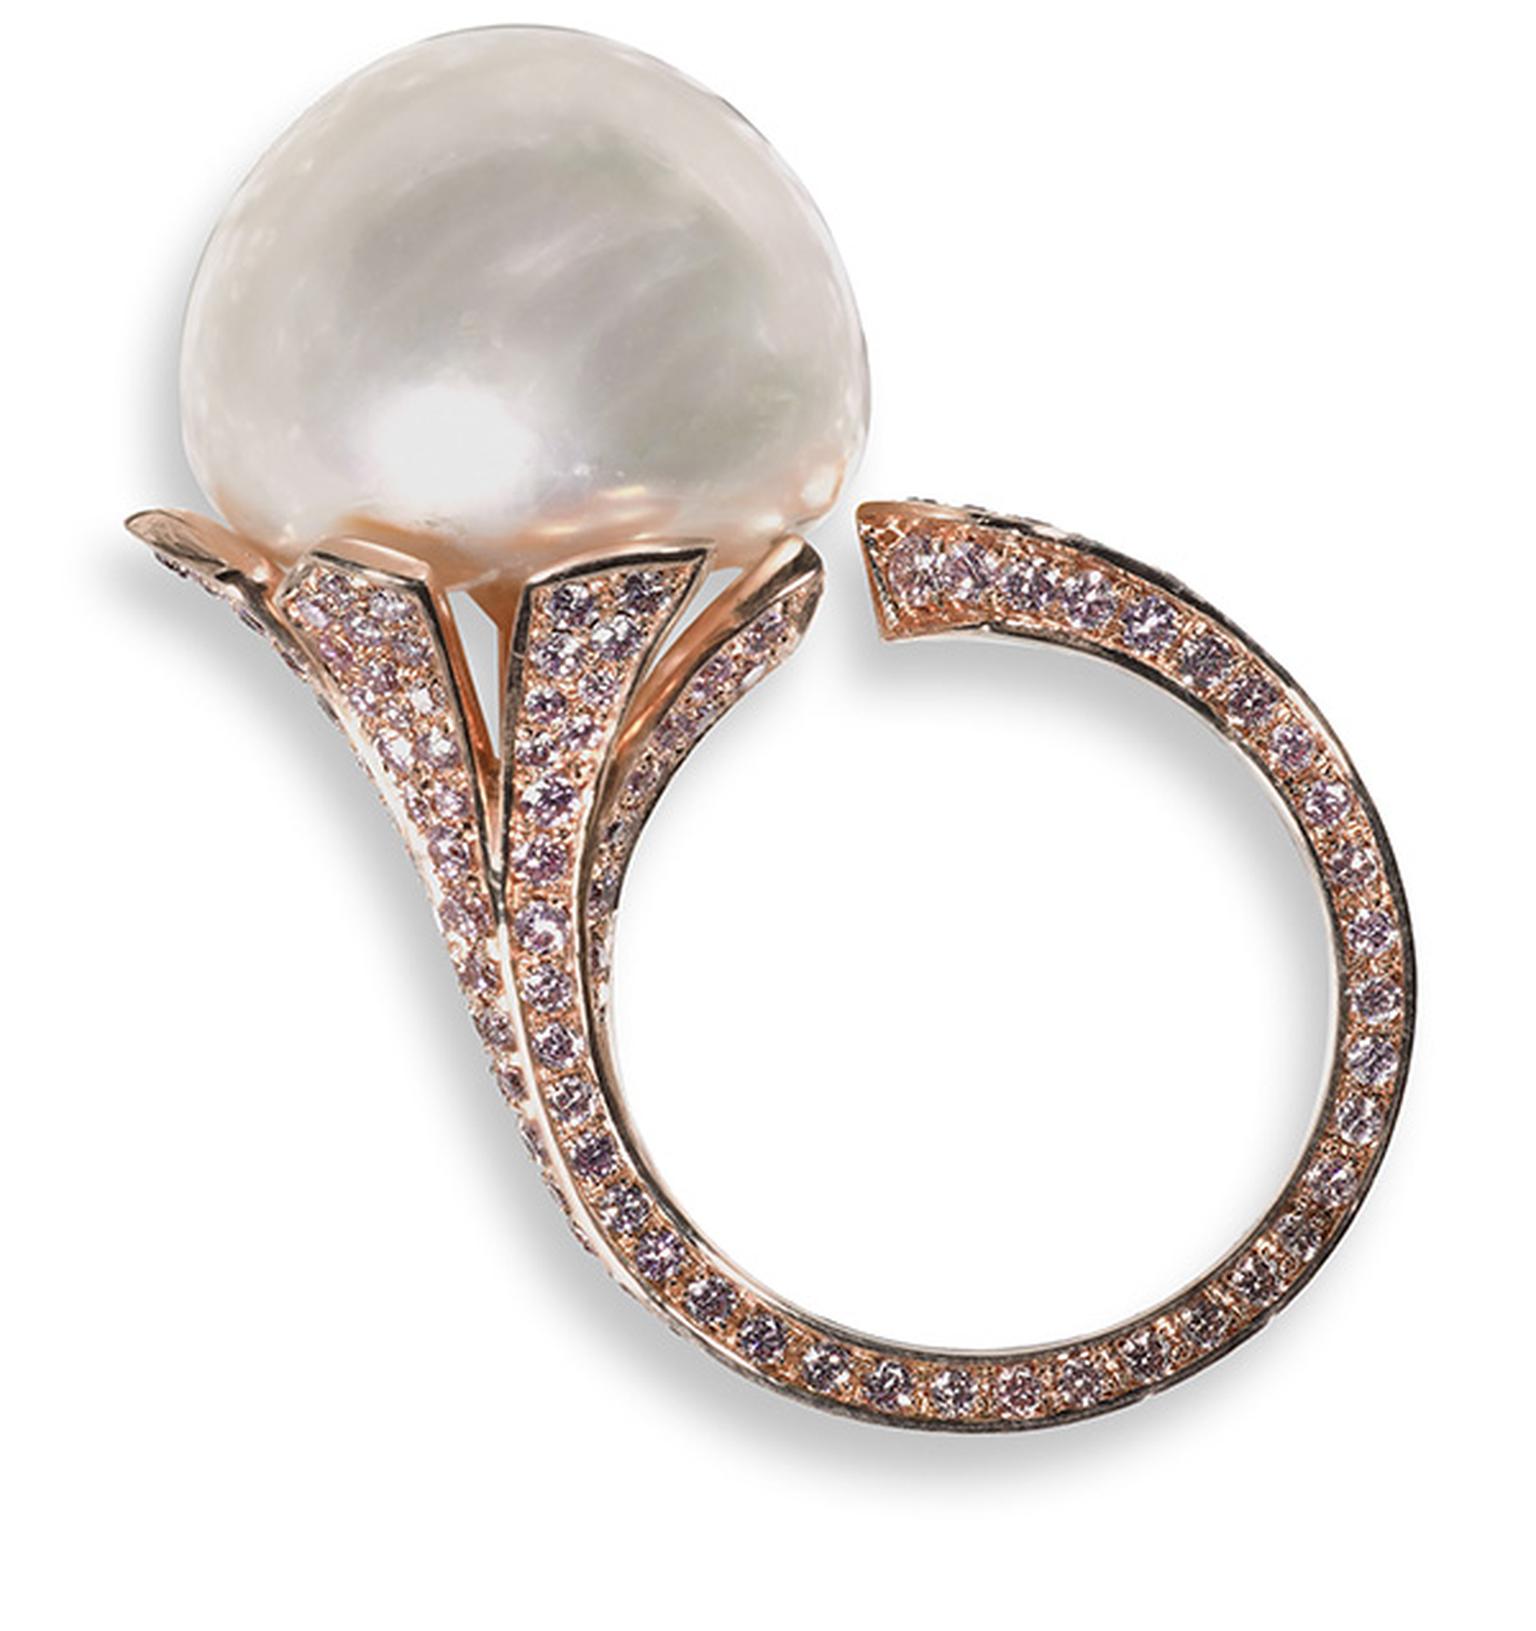 David-Morris-20.80ct-natural-light-cream-button-pearl-mounted-in-18ct-rose-gold-and-set-with-1.74cts-of-pink-micro-set-diamonds.-Retail-price-175000.jpg